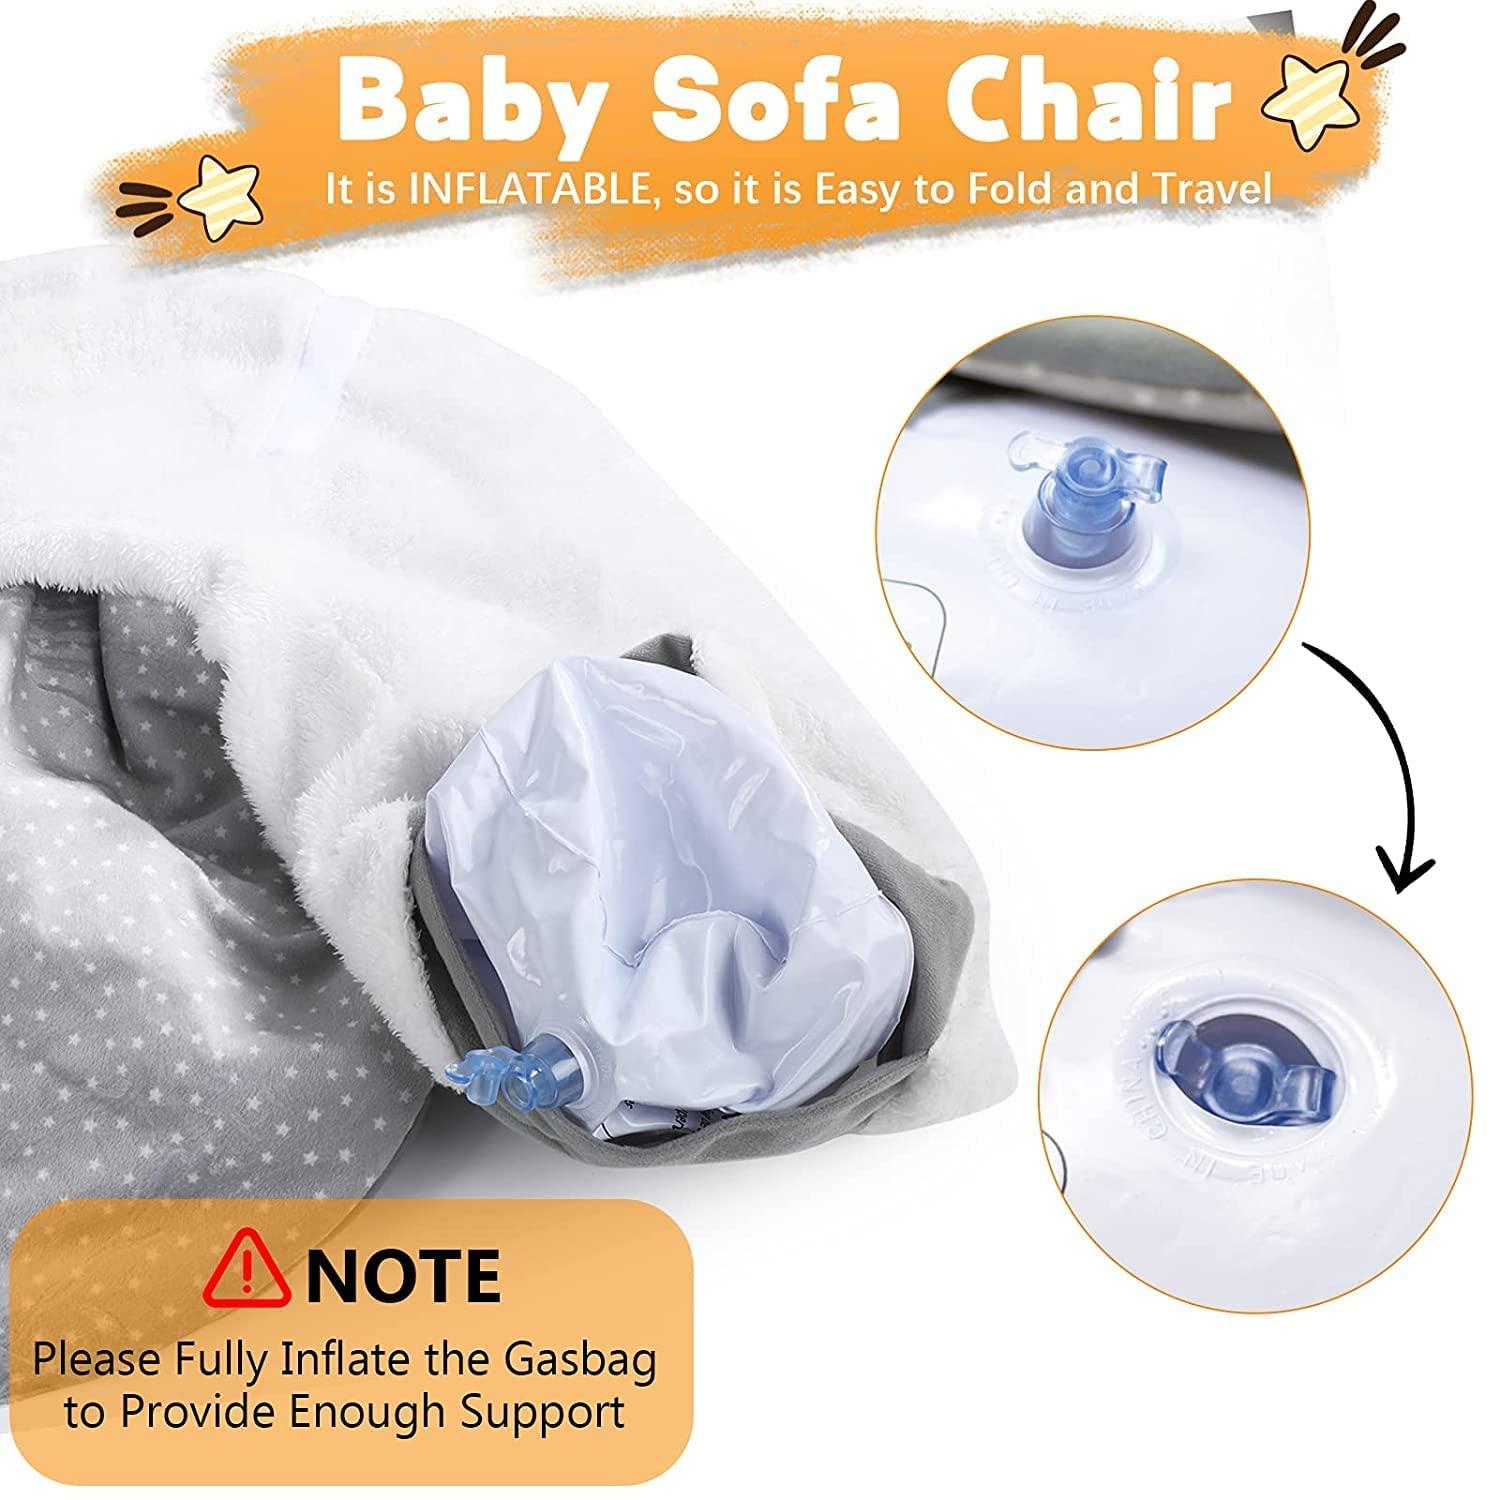 ANPPEX Baby Sofa Chair, Baby Support Seat for Sitting Up